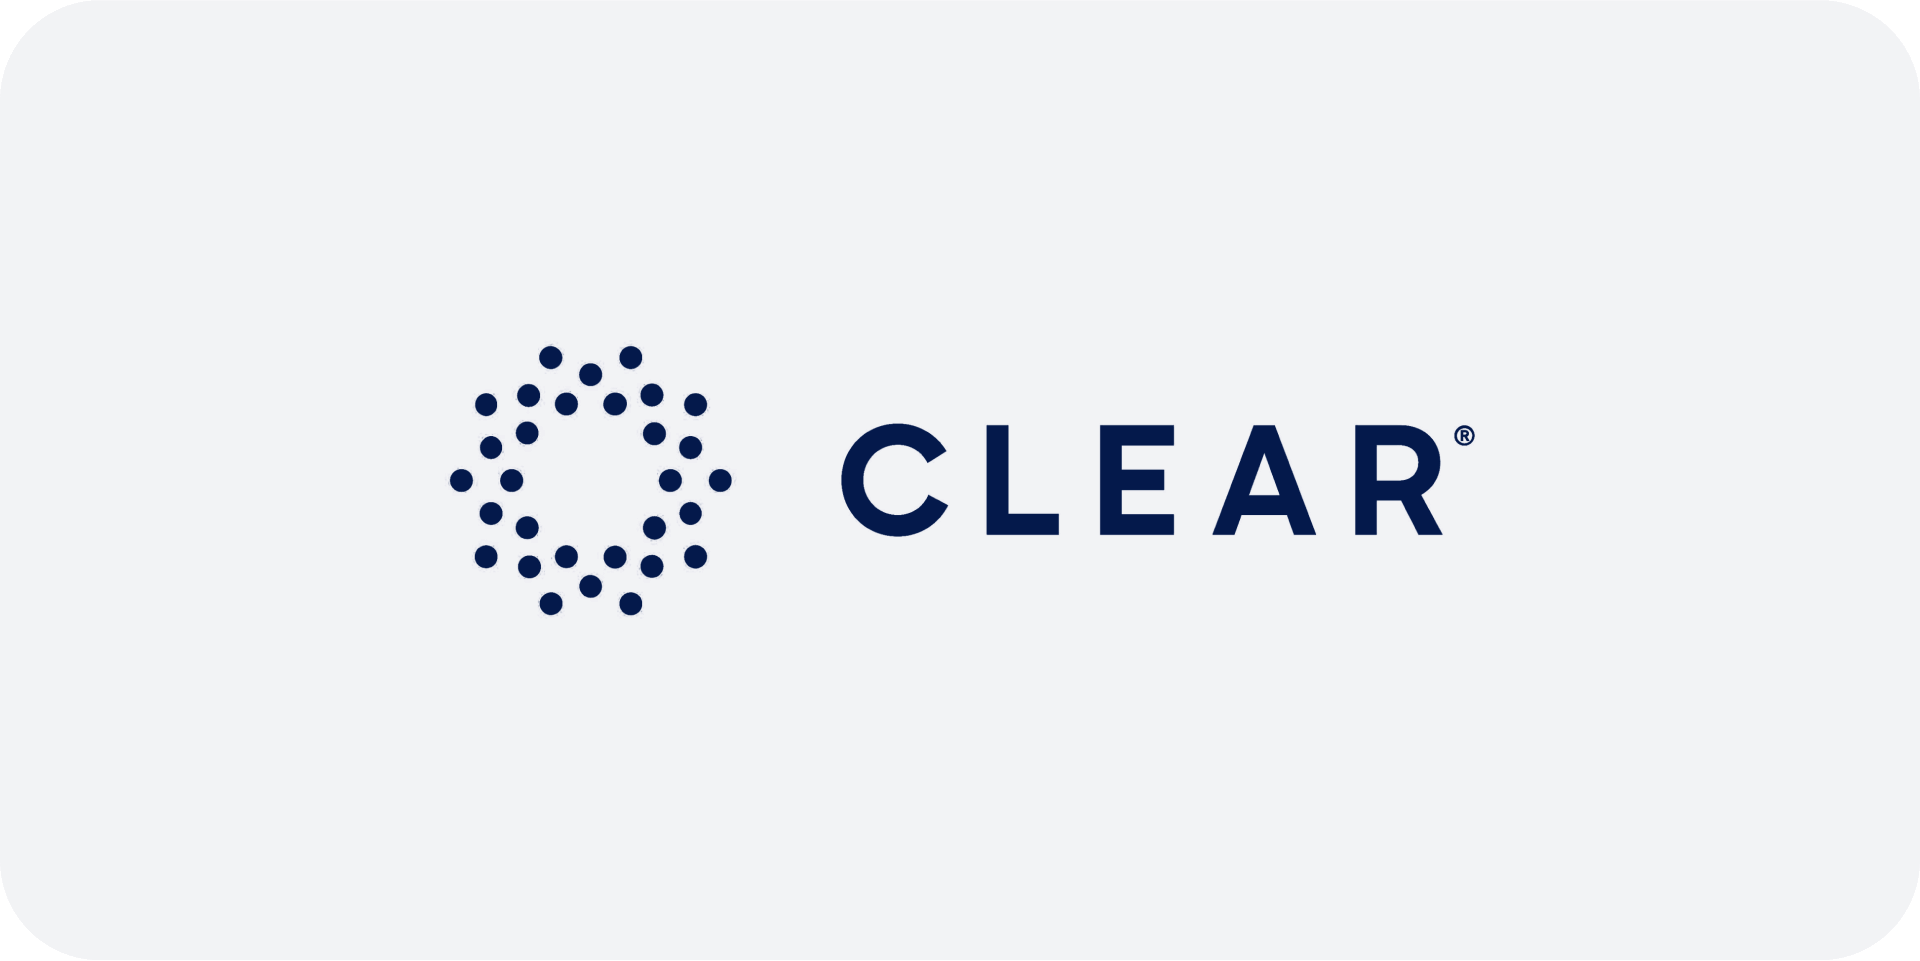 Clear Secure logo